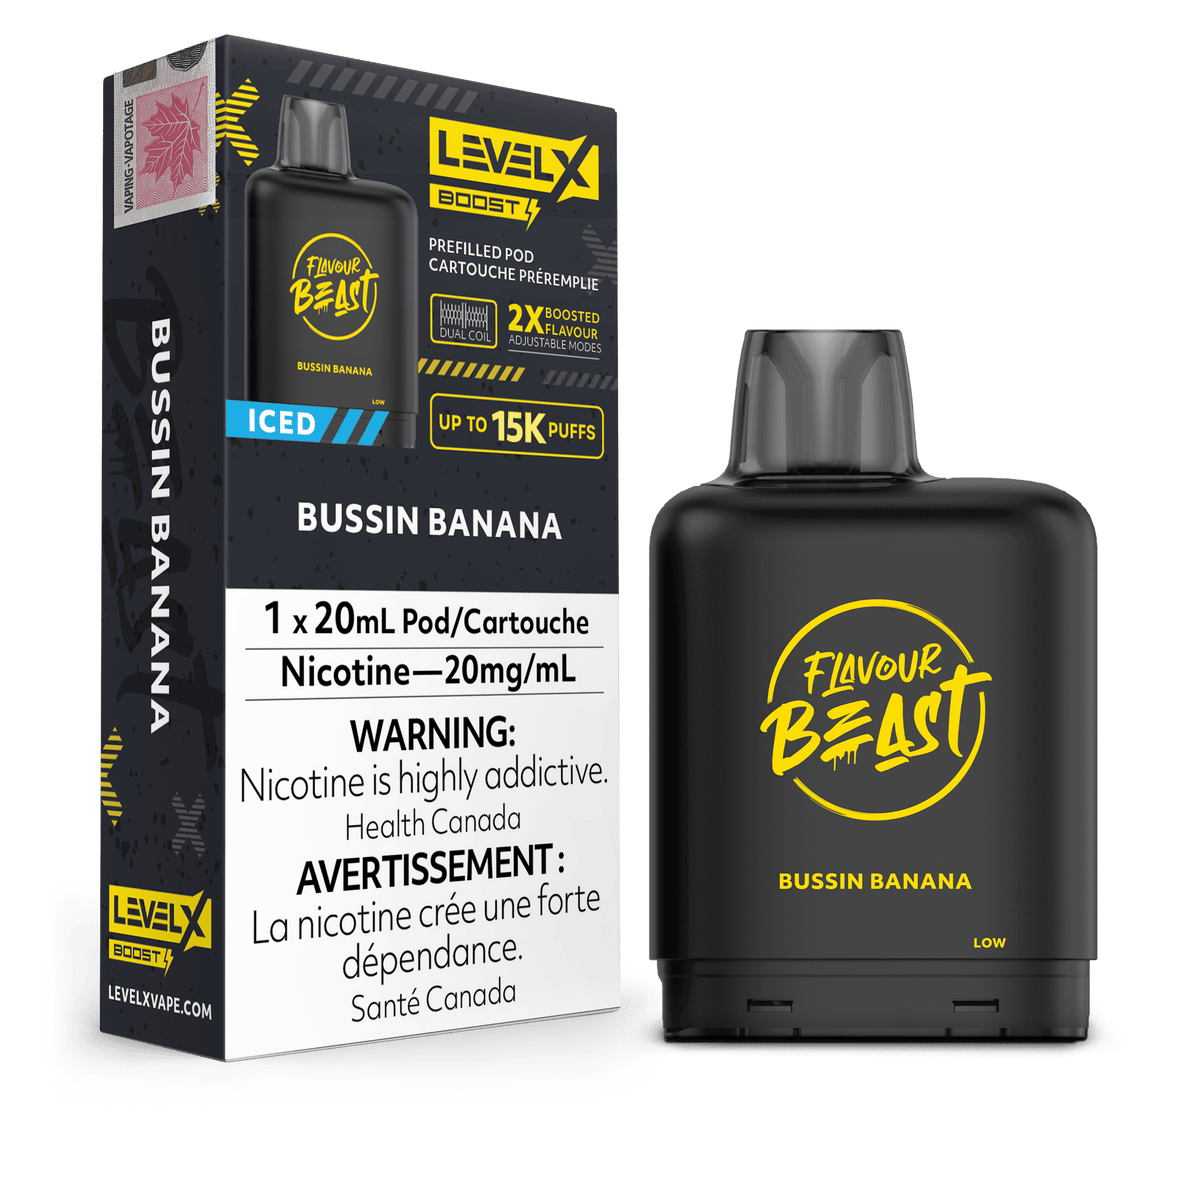 Level X Flavour Beast Boost Pod - Bussin Banana Iced available on Canada online vape shop